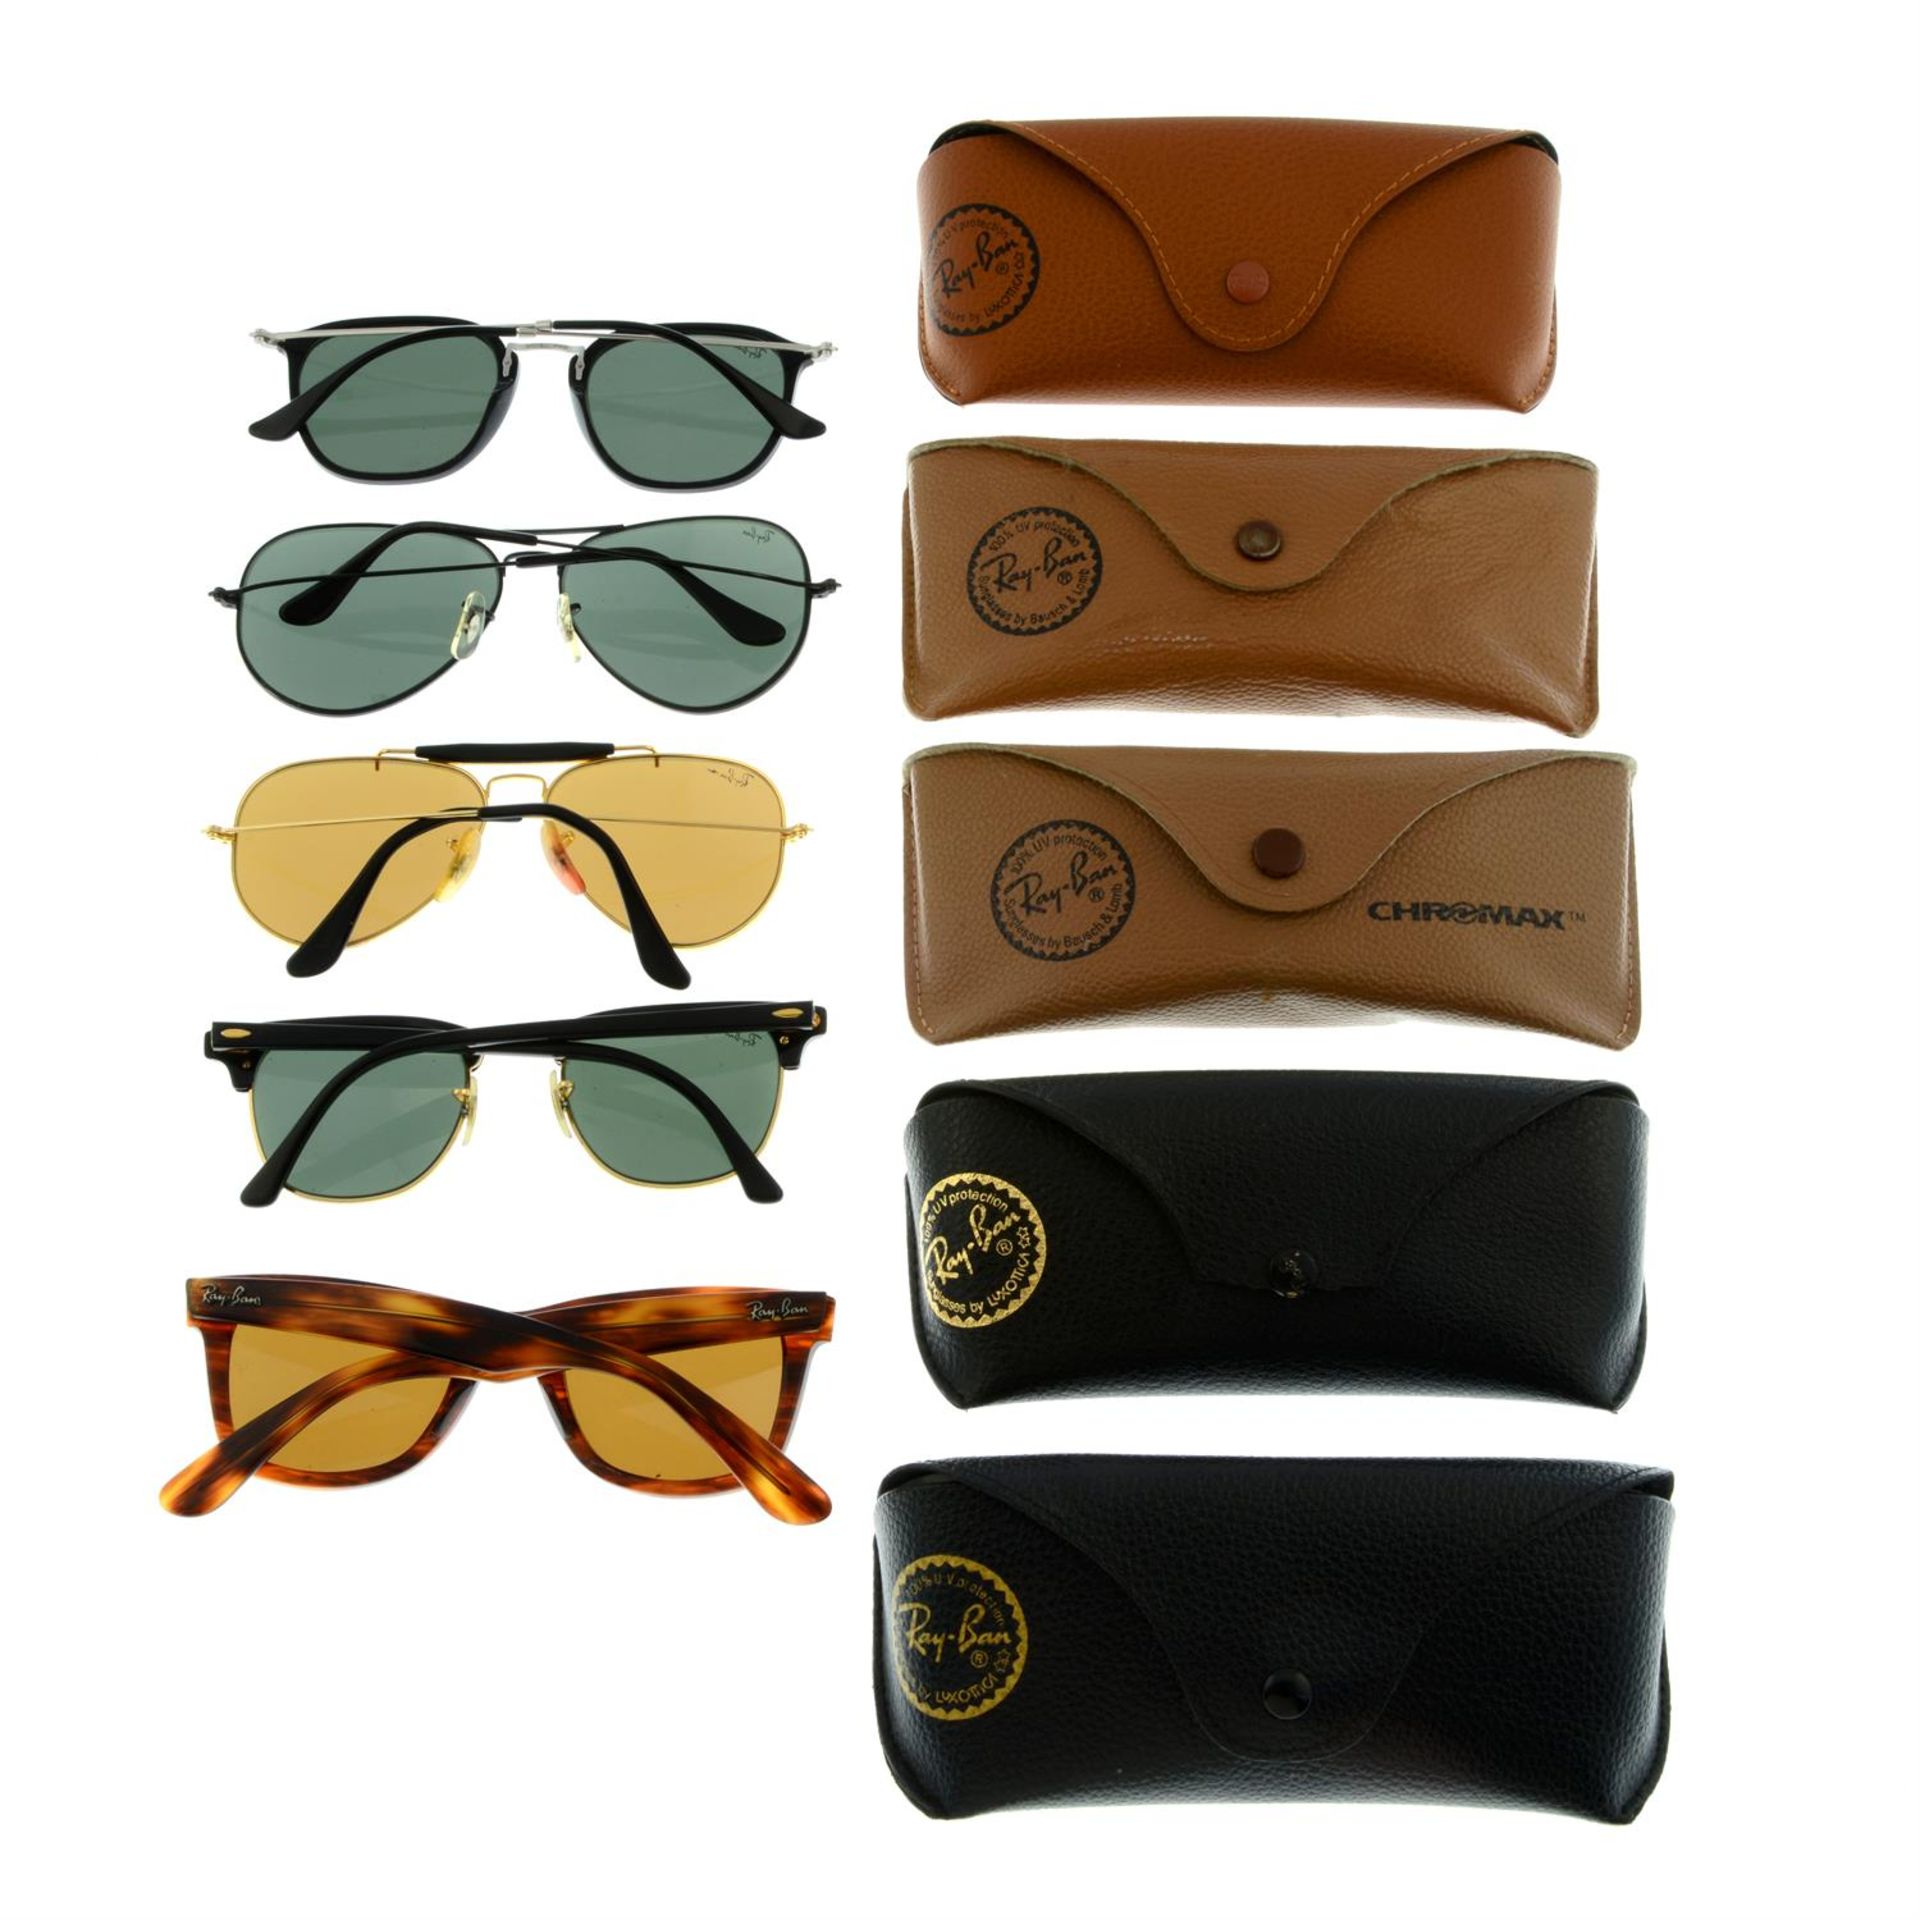 RAY BAN - five pairs of sunglasses. - Image 2 of 2